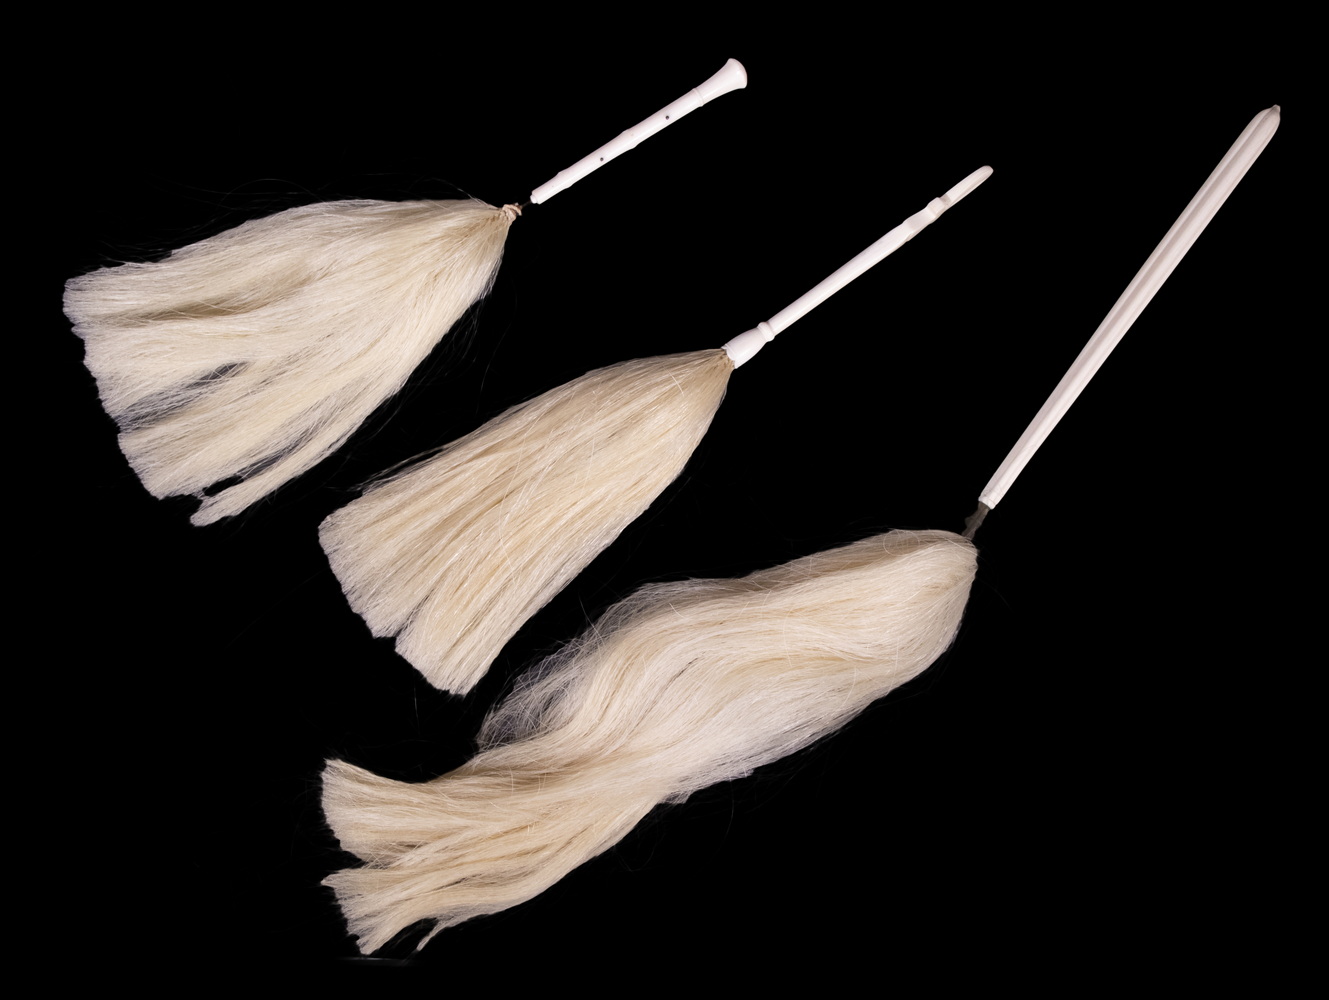  3 19TH C JAPANESE FLY WHISKS 3b6a7e